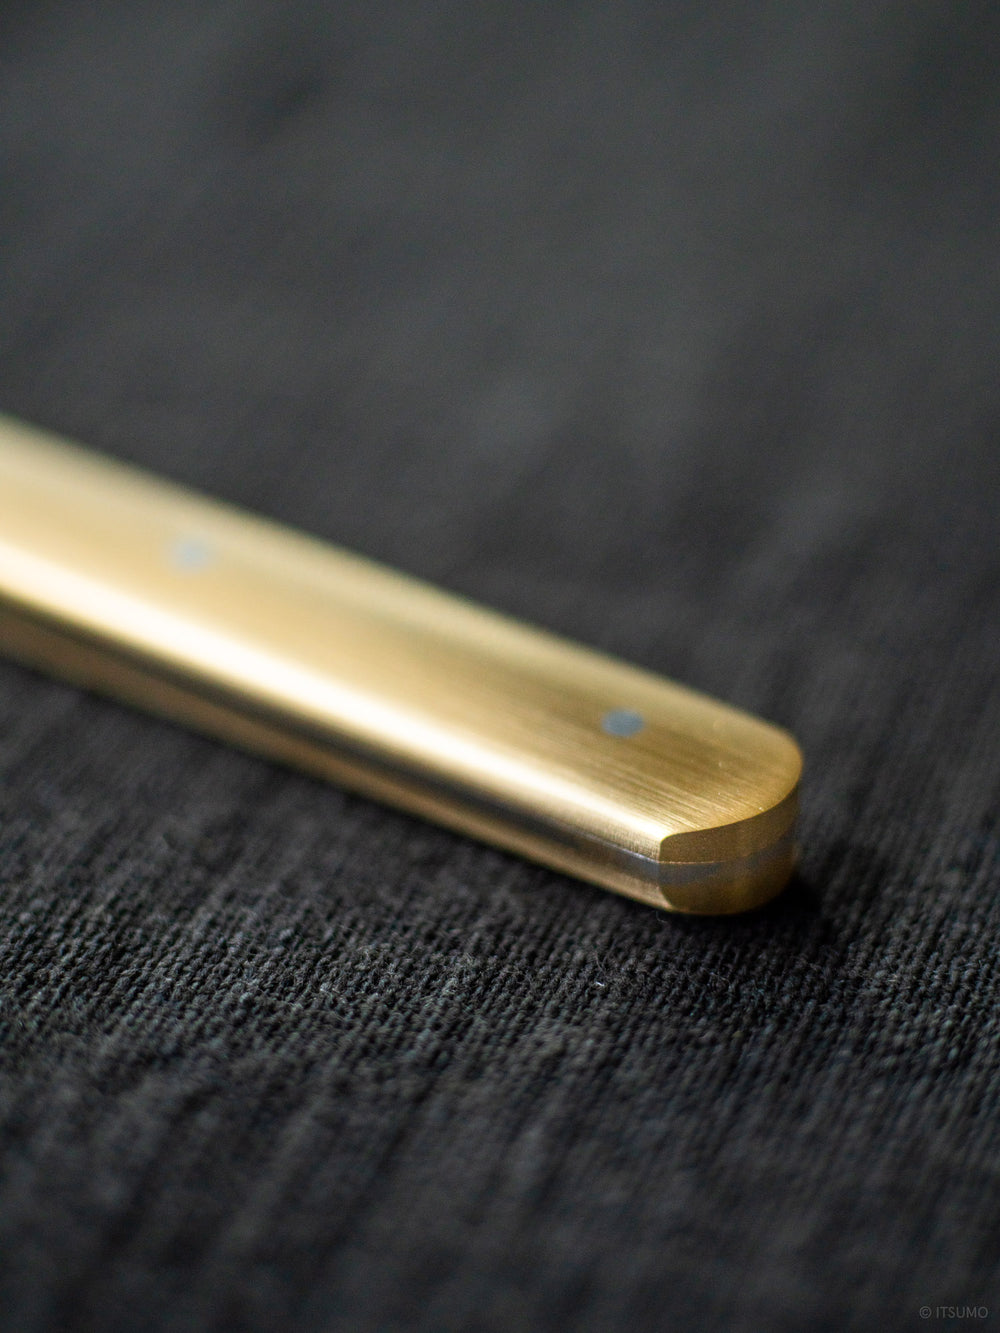 Brass handle close up details showing a slightly round edge, on a stainless steel cheese knife made in Japan